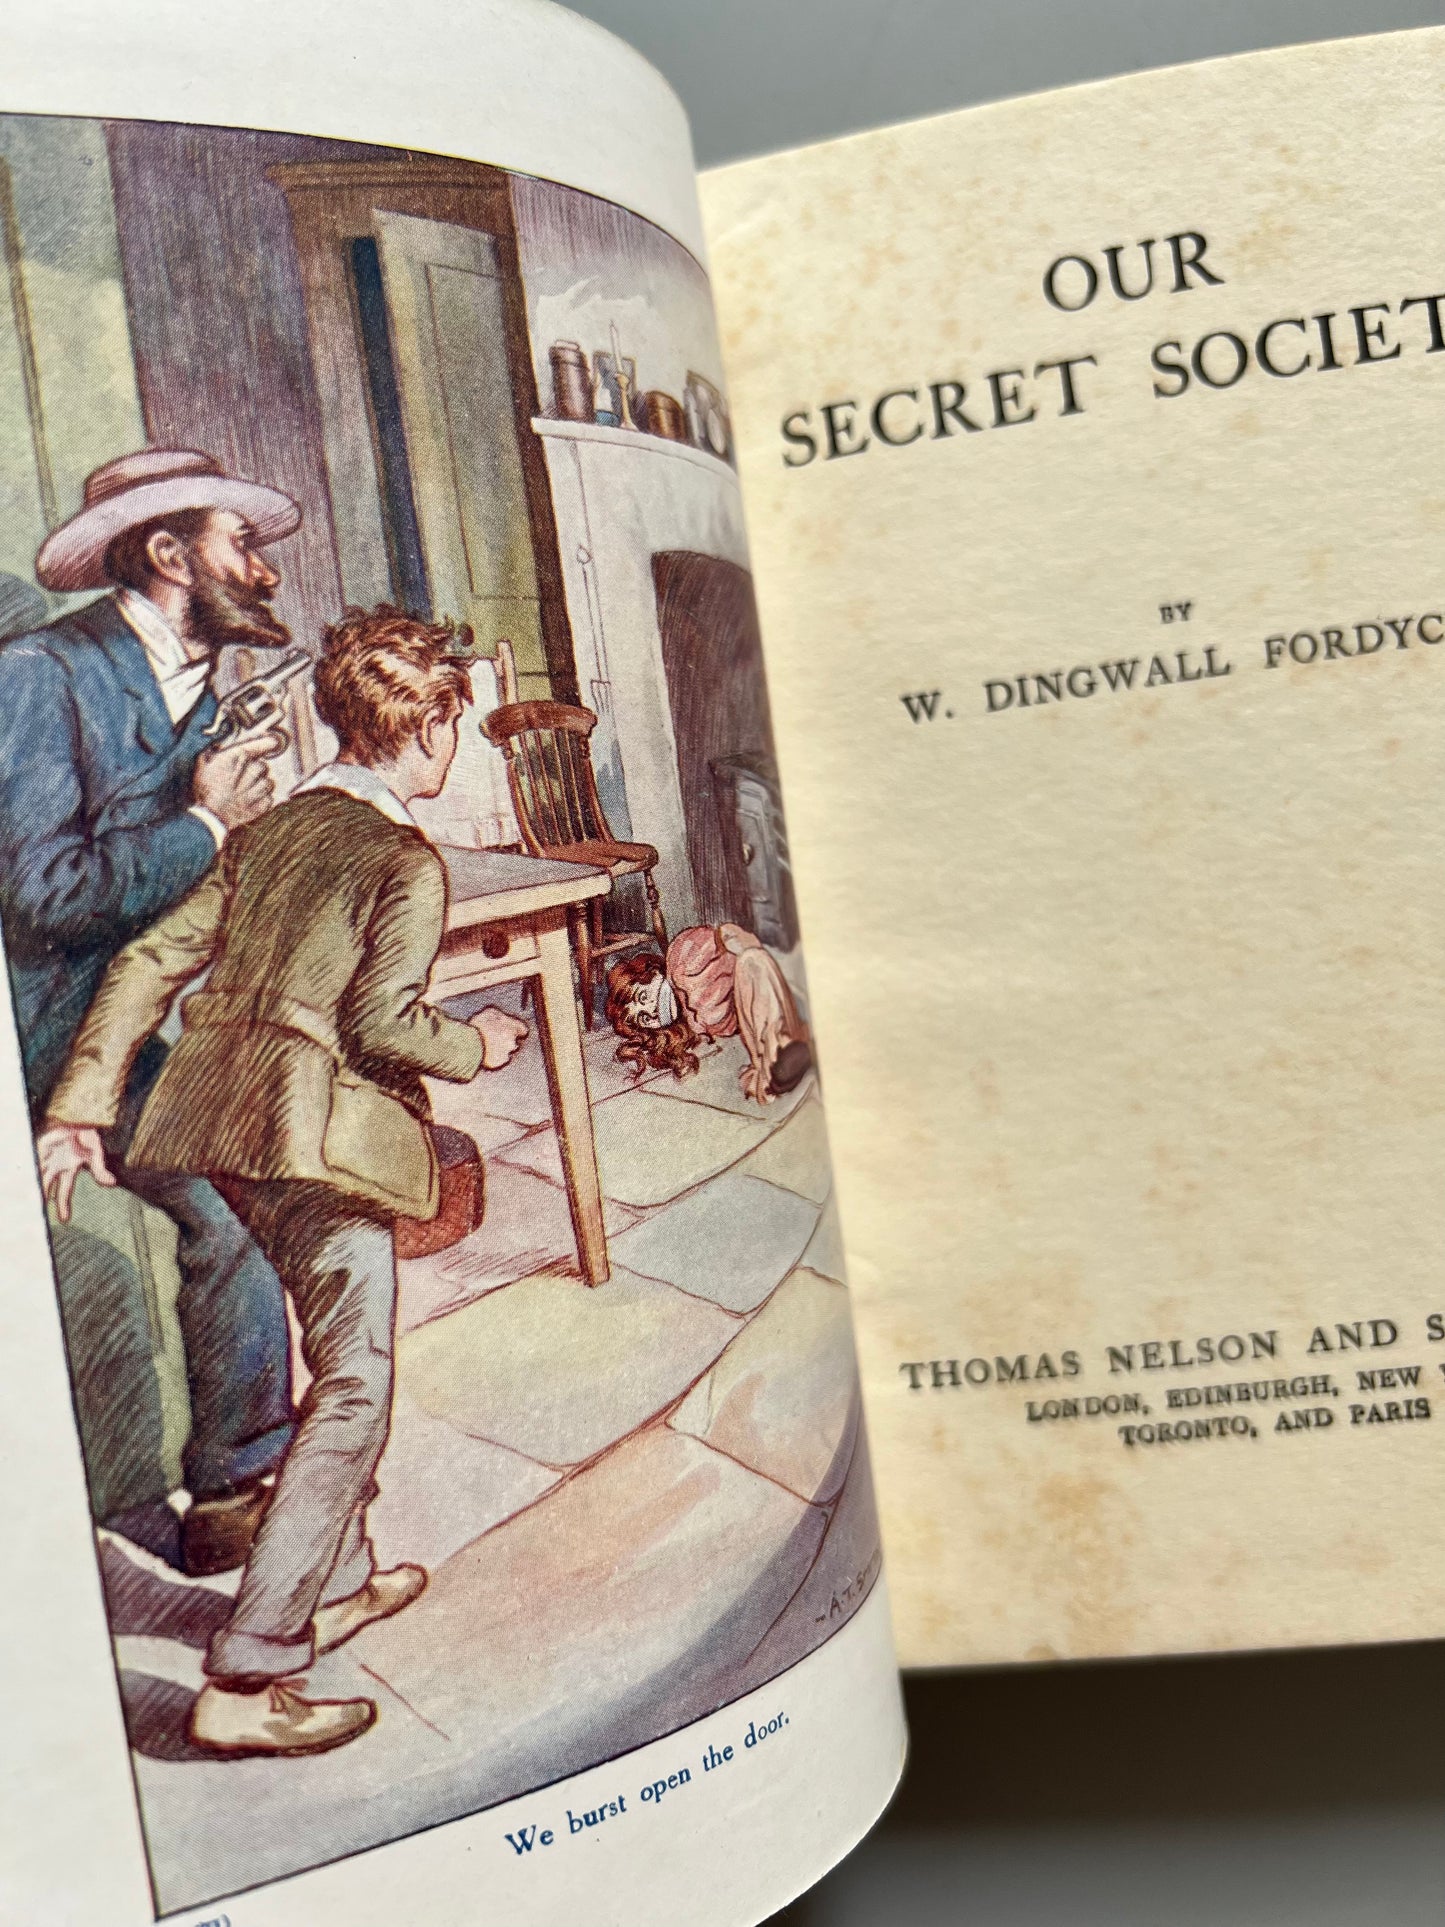 Our secret society, W. Dingwall Fordyce - Thomas Nelson and Sons, ca. 1920